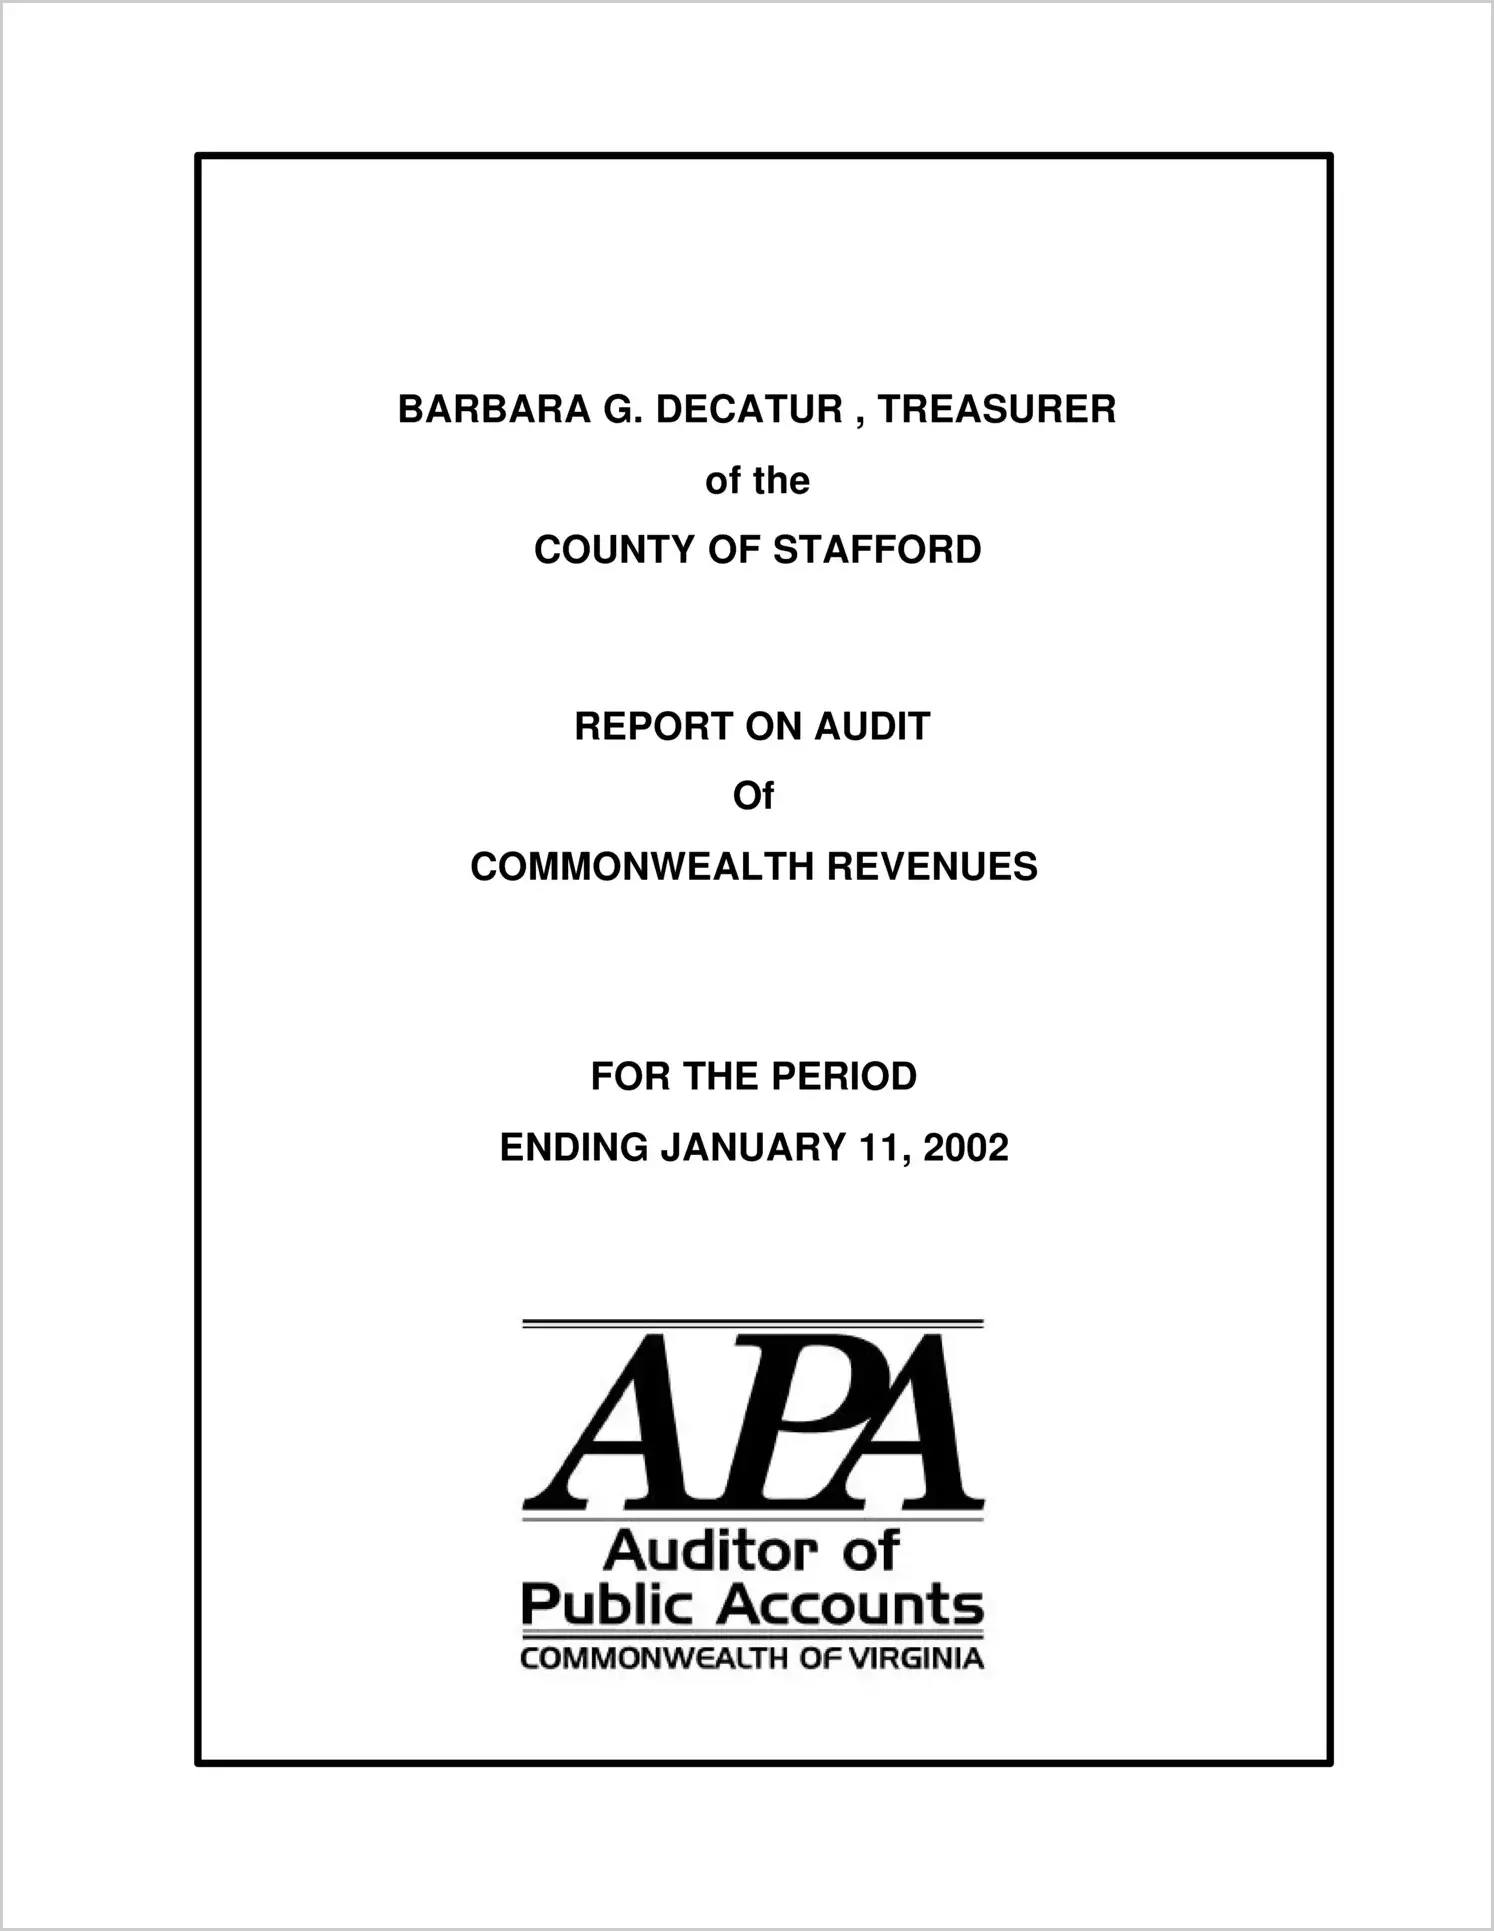 Clerk of the Circuit Court Turnover for the County of Stafford for the period year ending January 11, 2002